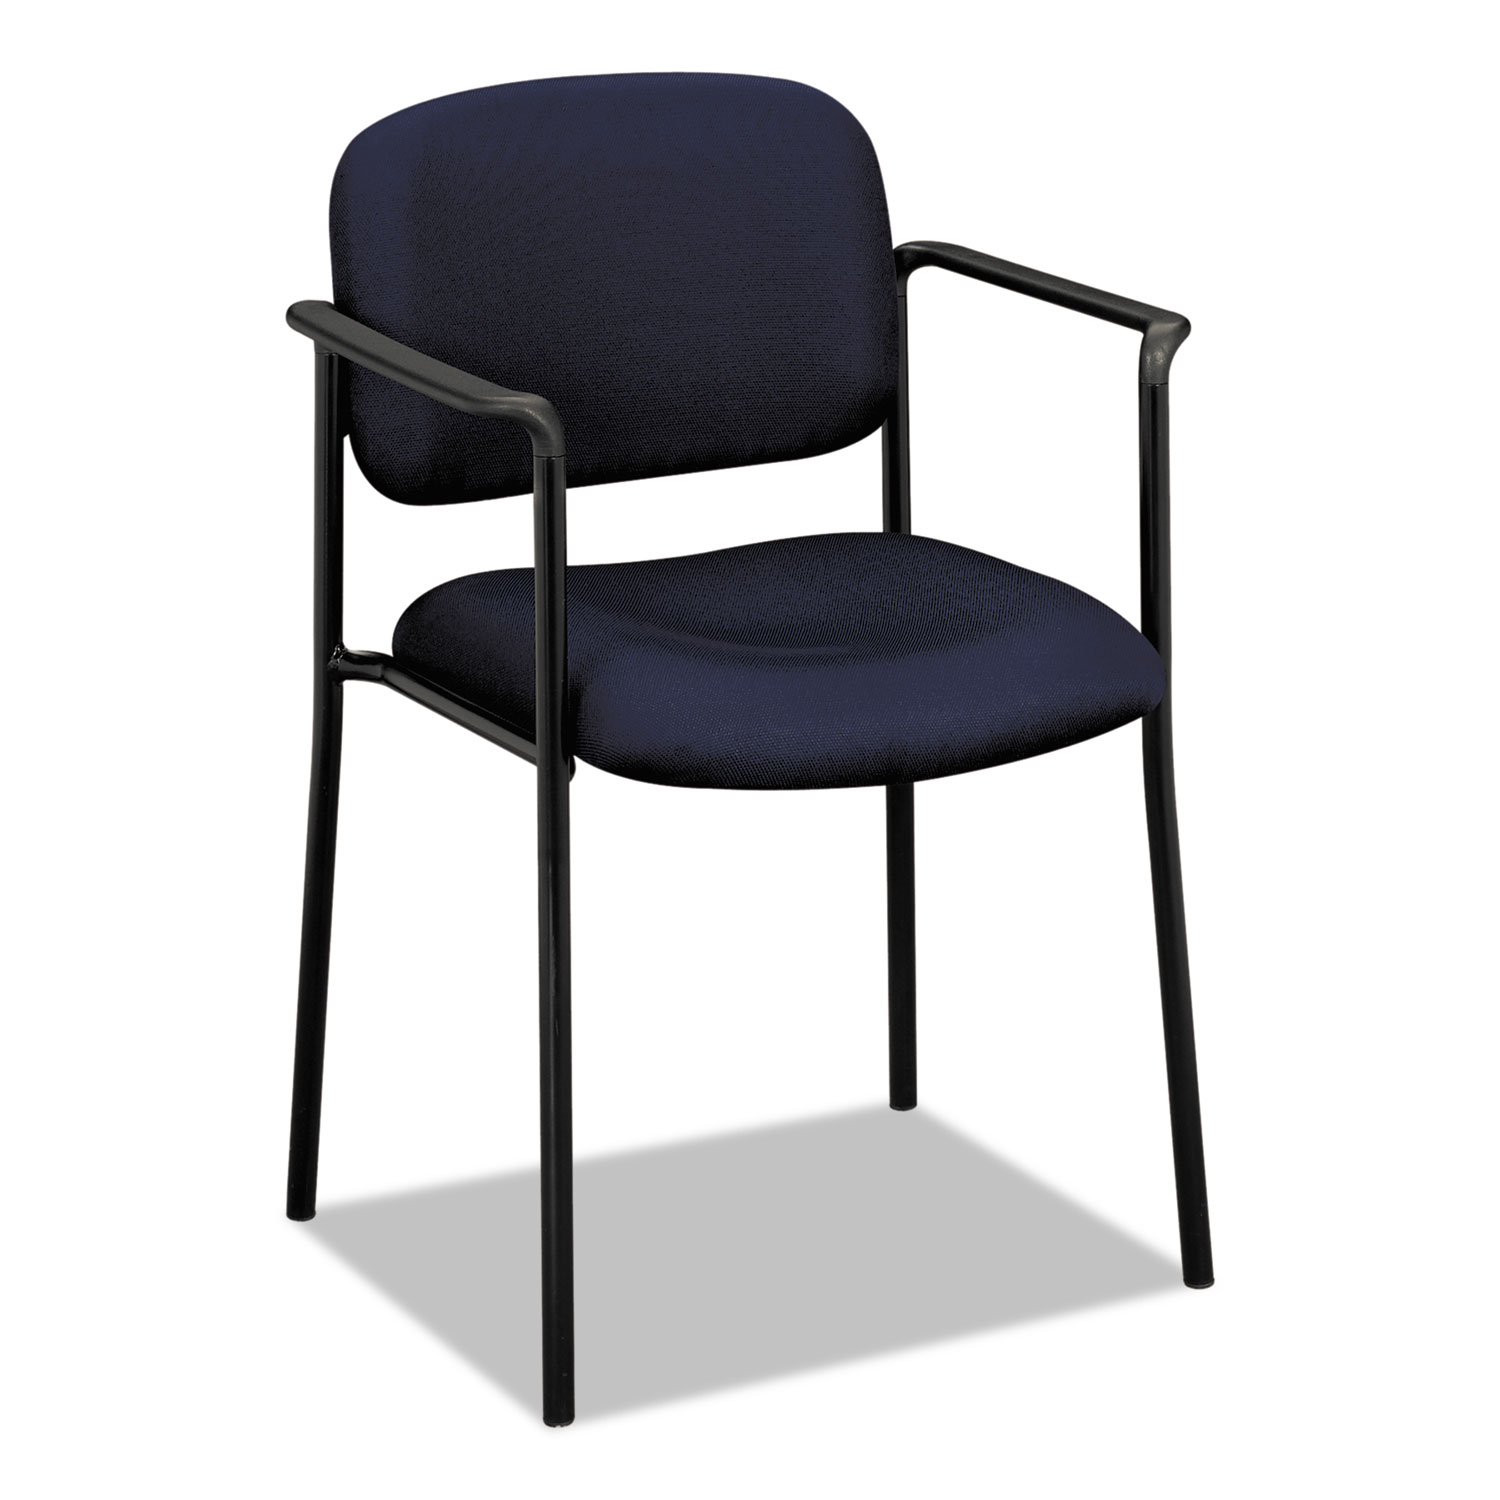 VL616 Series Stacking Guest Chair with Arms, Navy Fabric